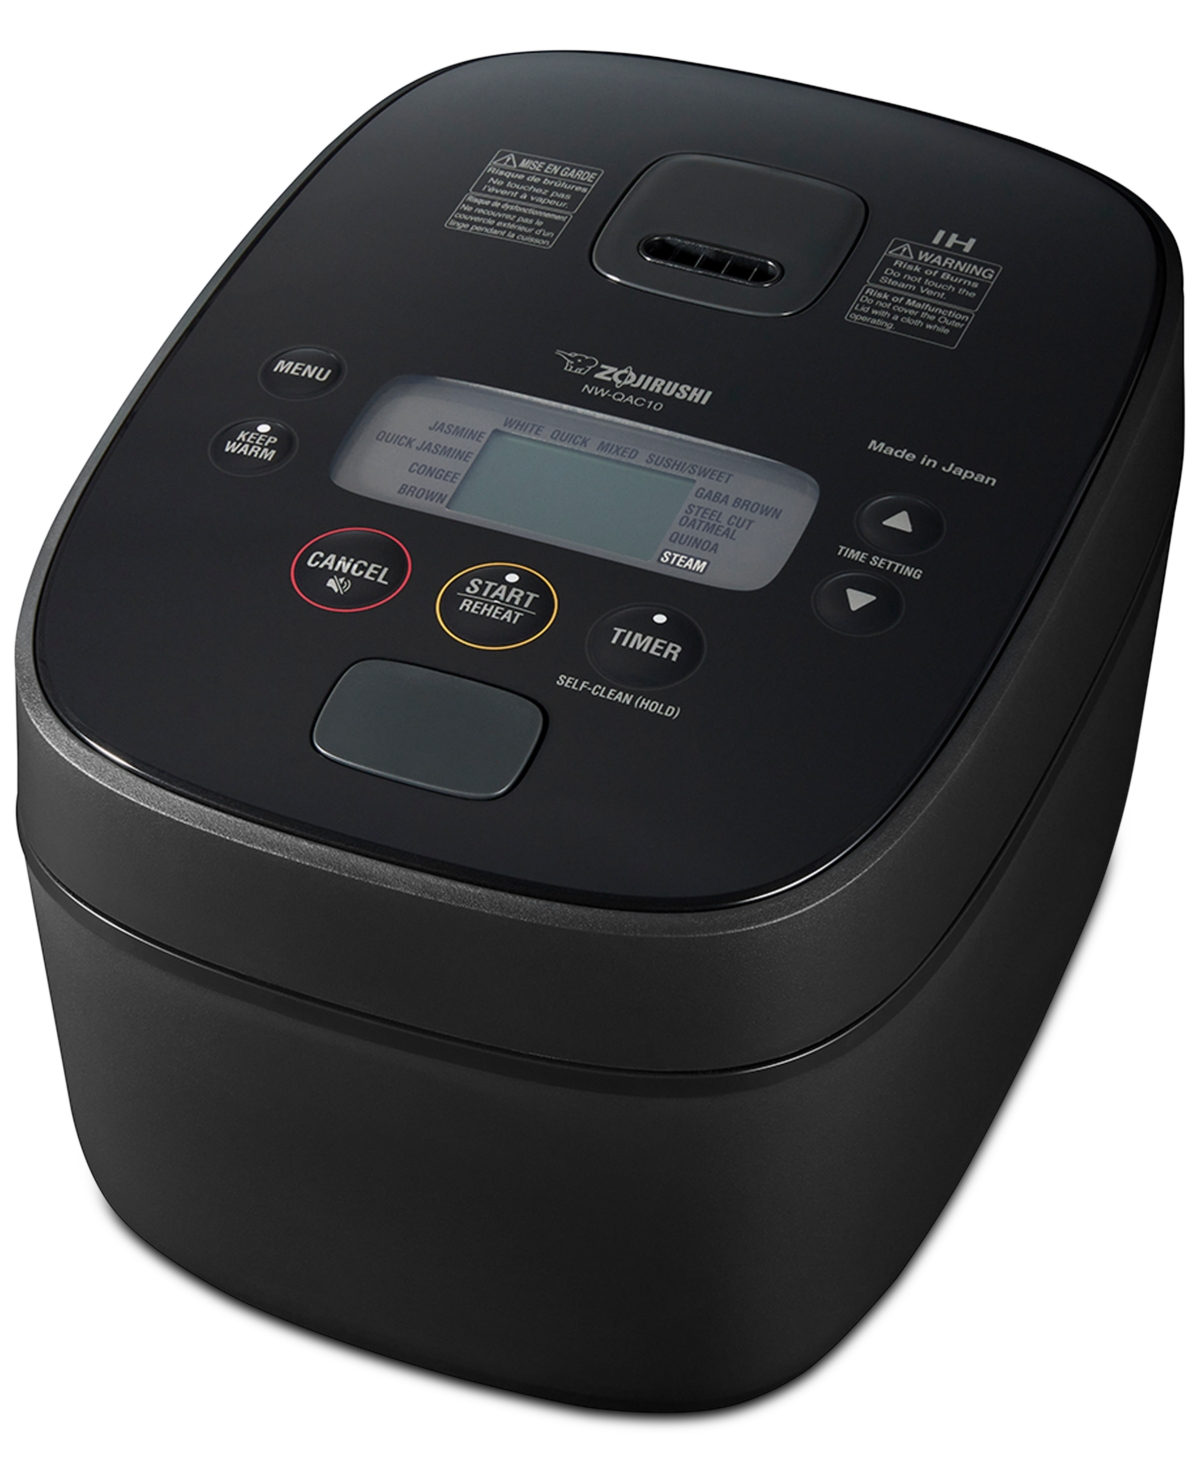 Zojirushi 5.5-cup Induction Heating Rice Cooker & Warmer In Black